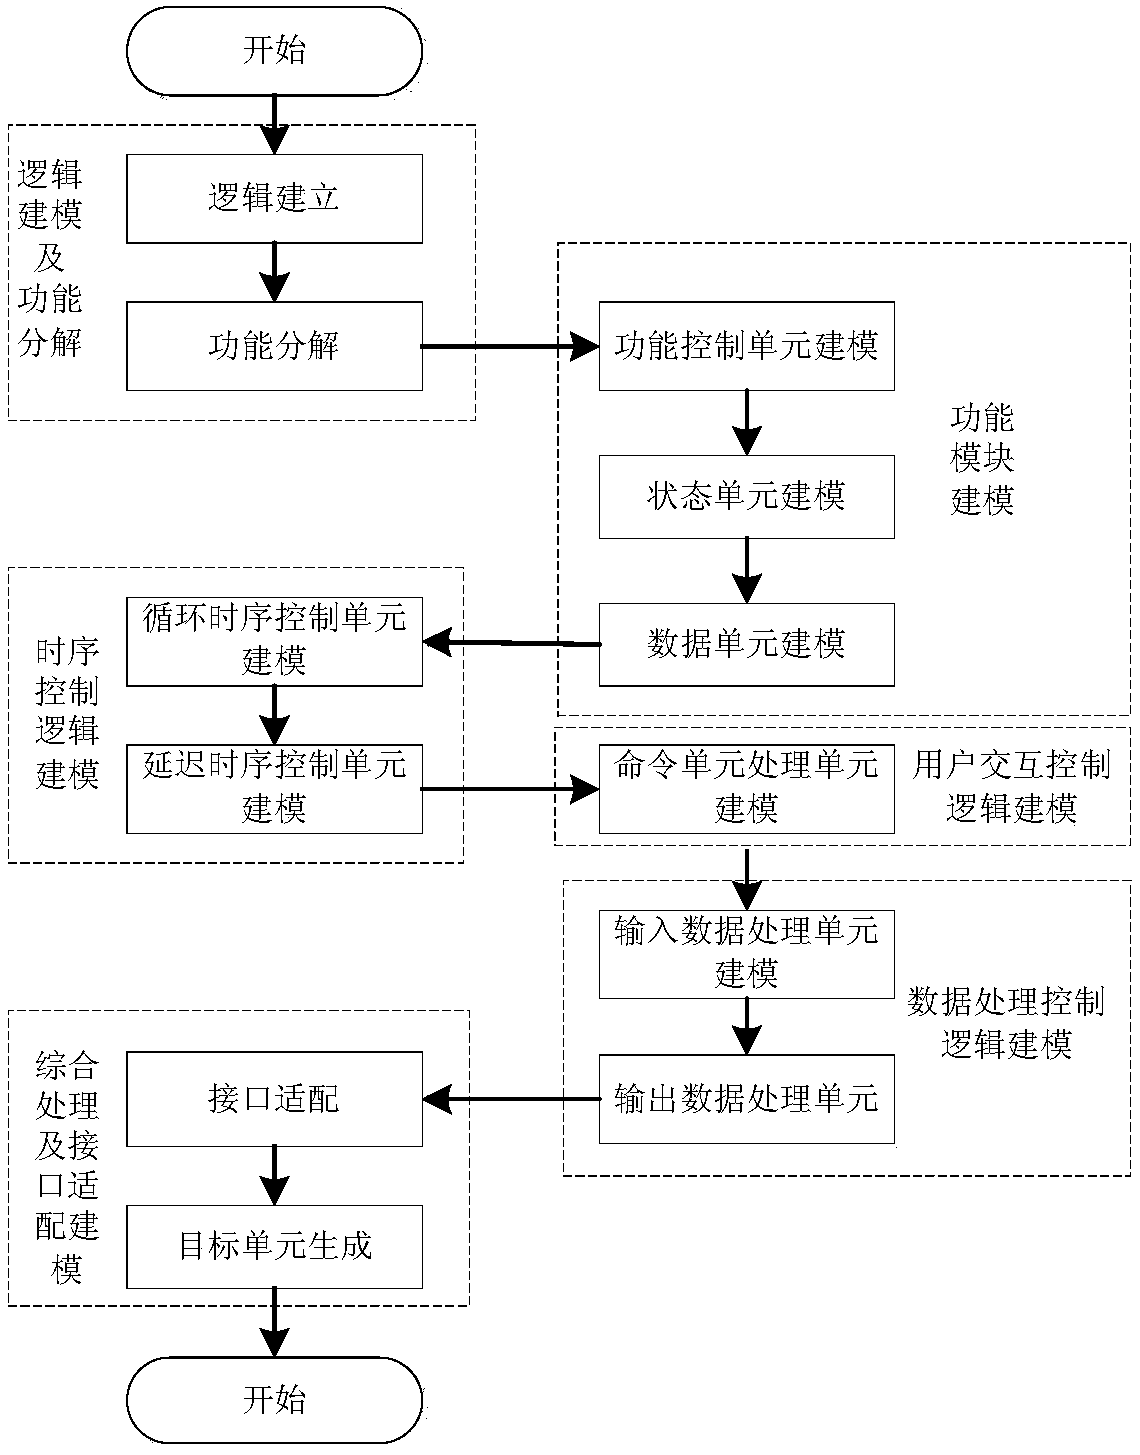 An Embedded Simulation Serial Port and Modeling Method Based on Device Modeling Language